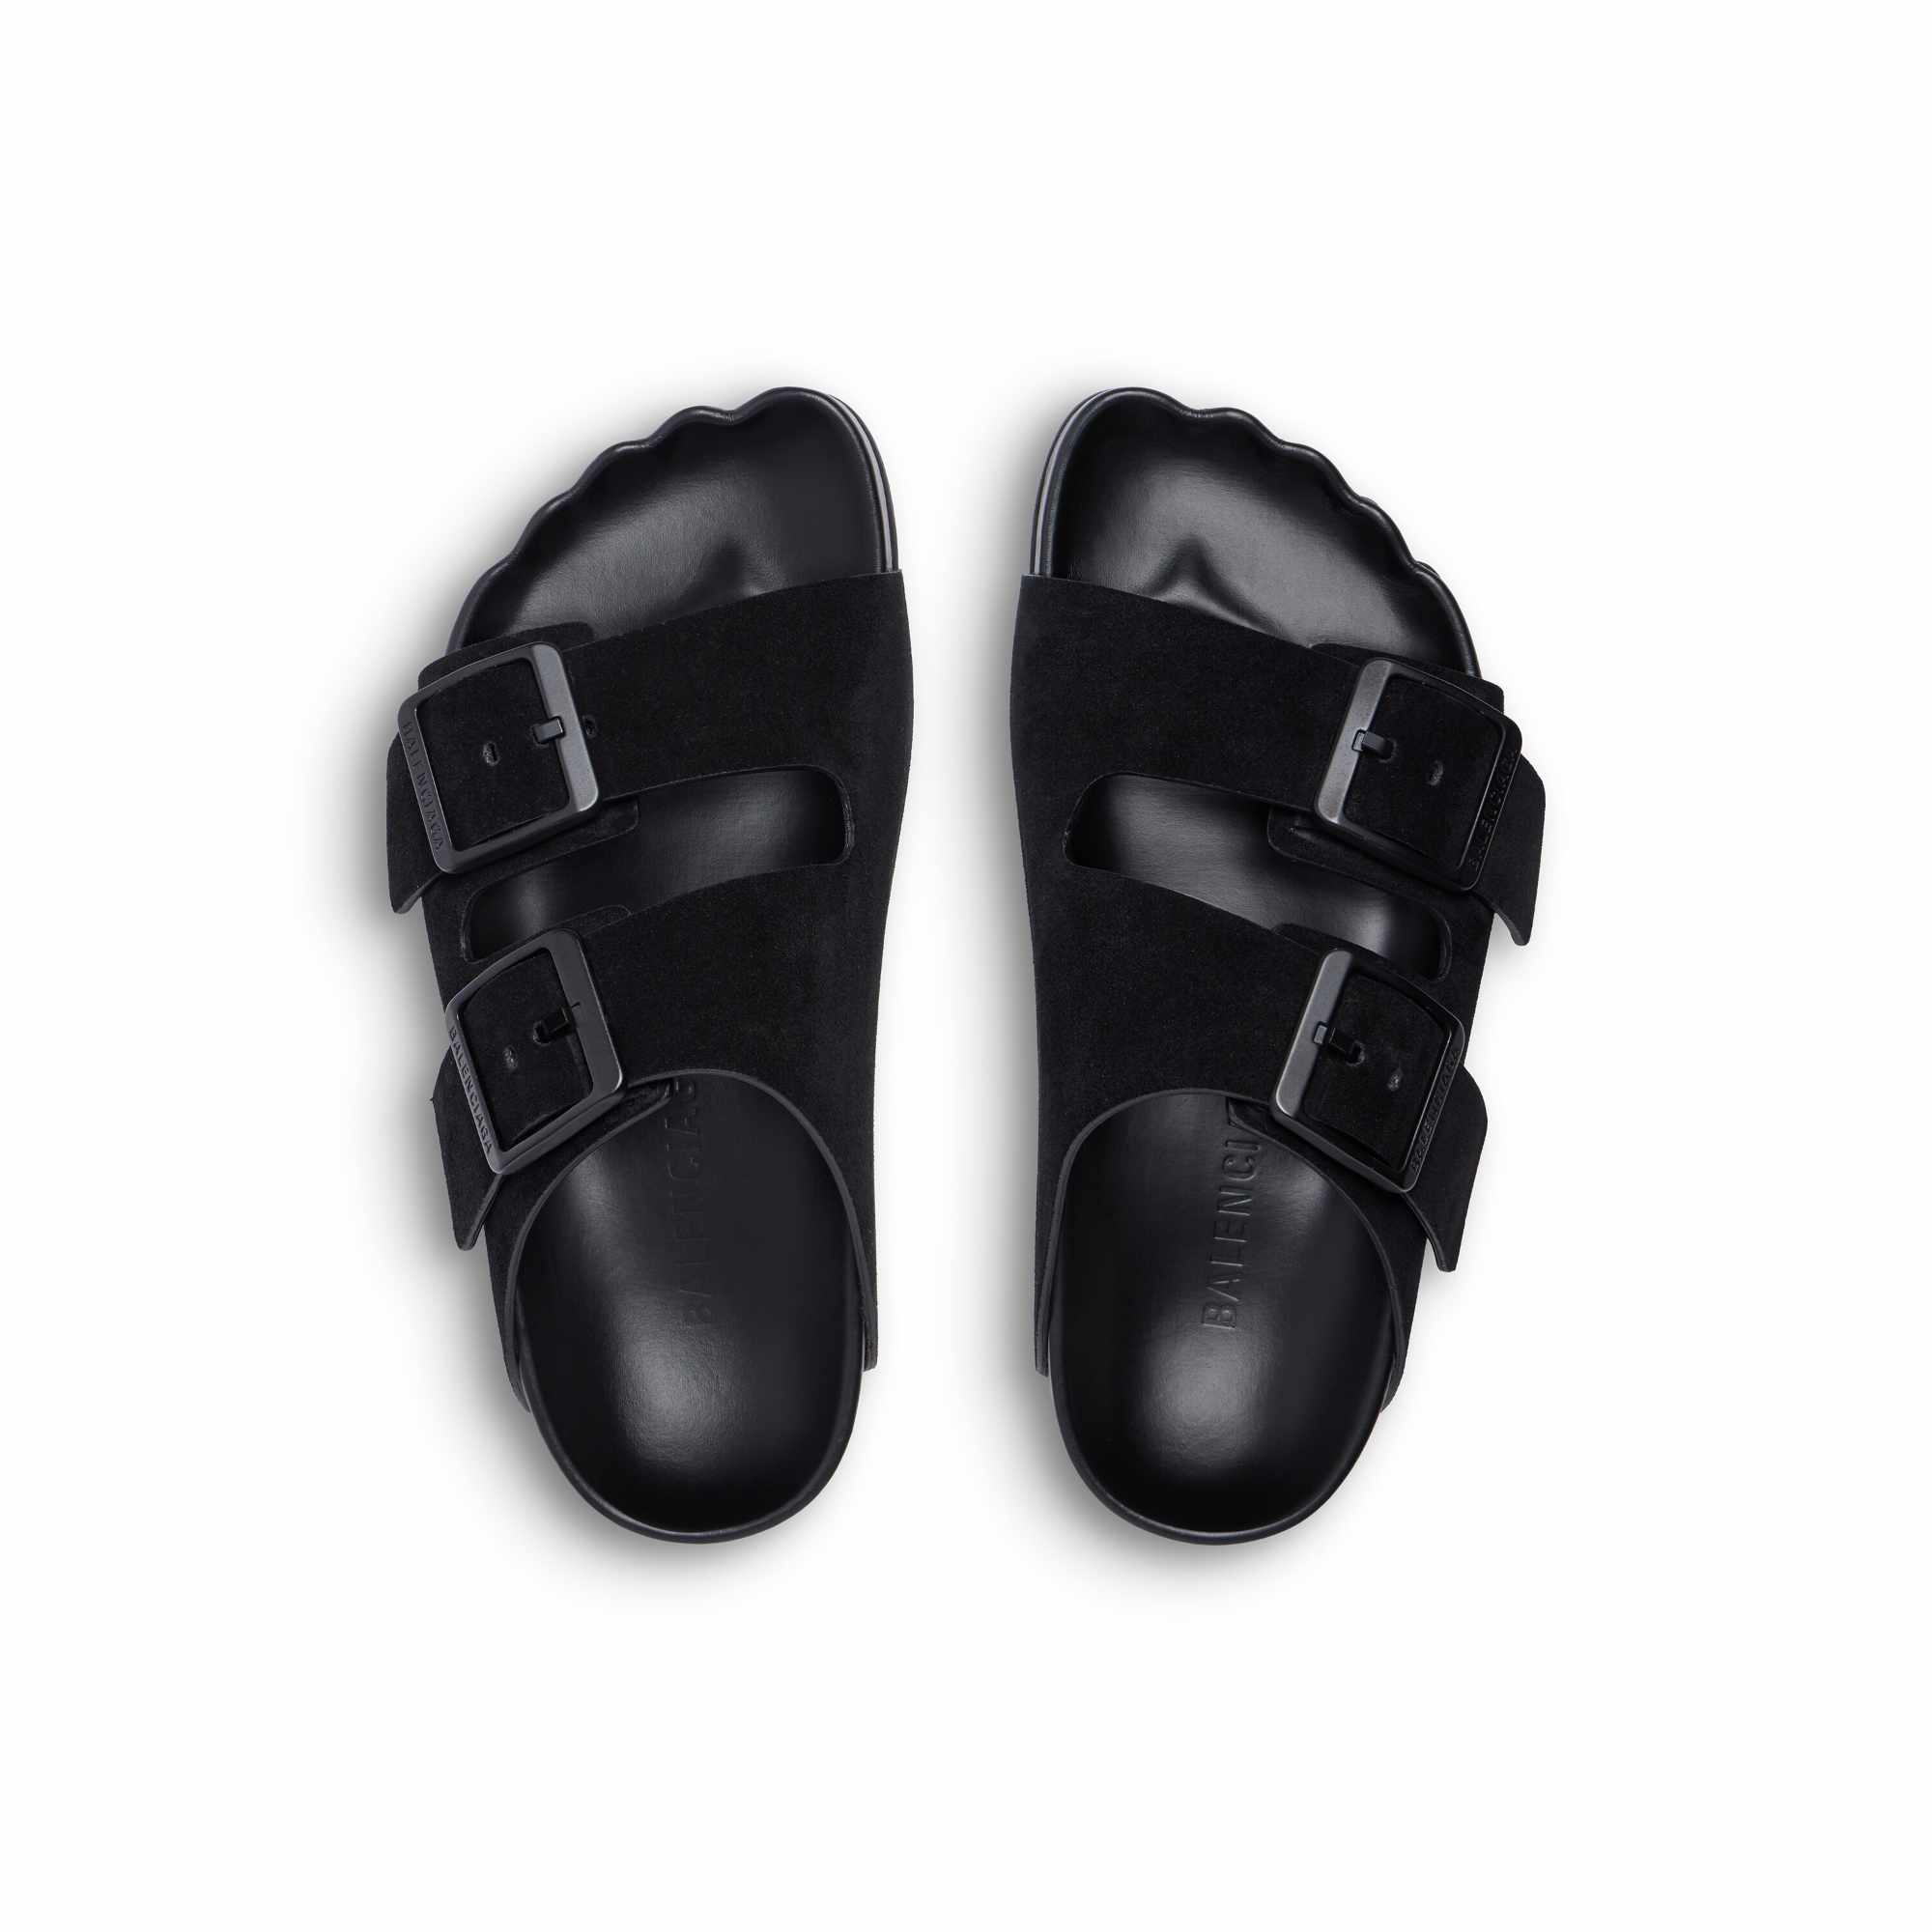 Balenciaga's Sunday Sandal in black suede, with two buckled straps and footbed